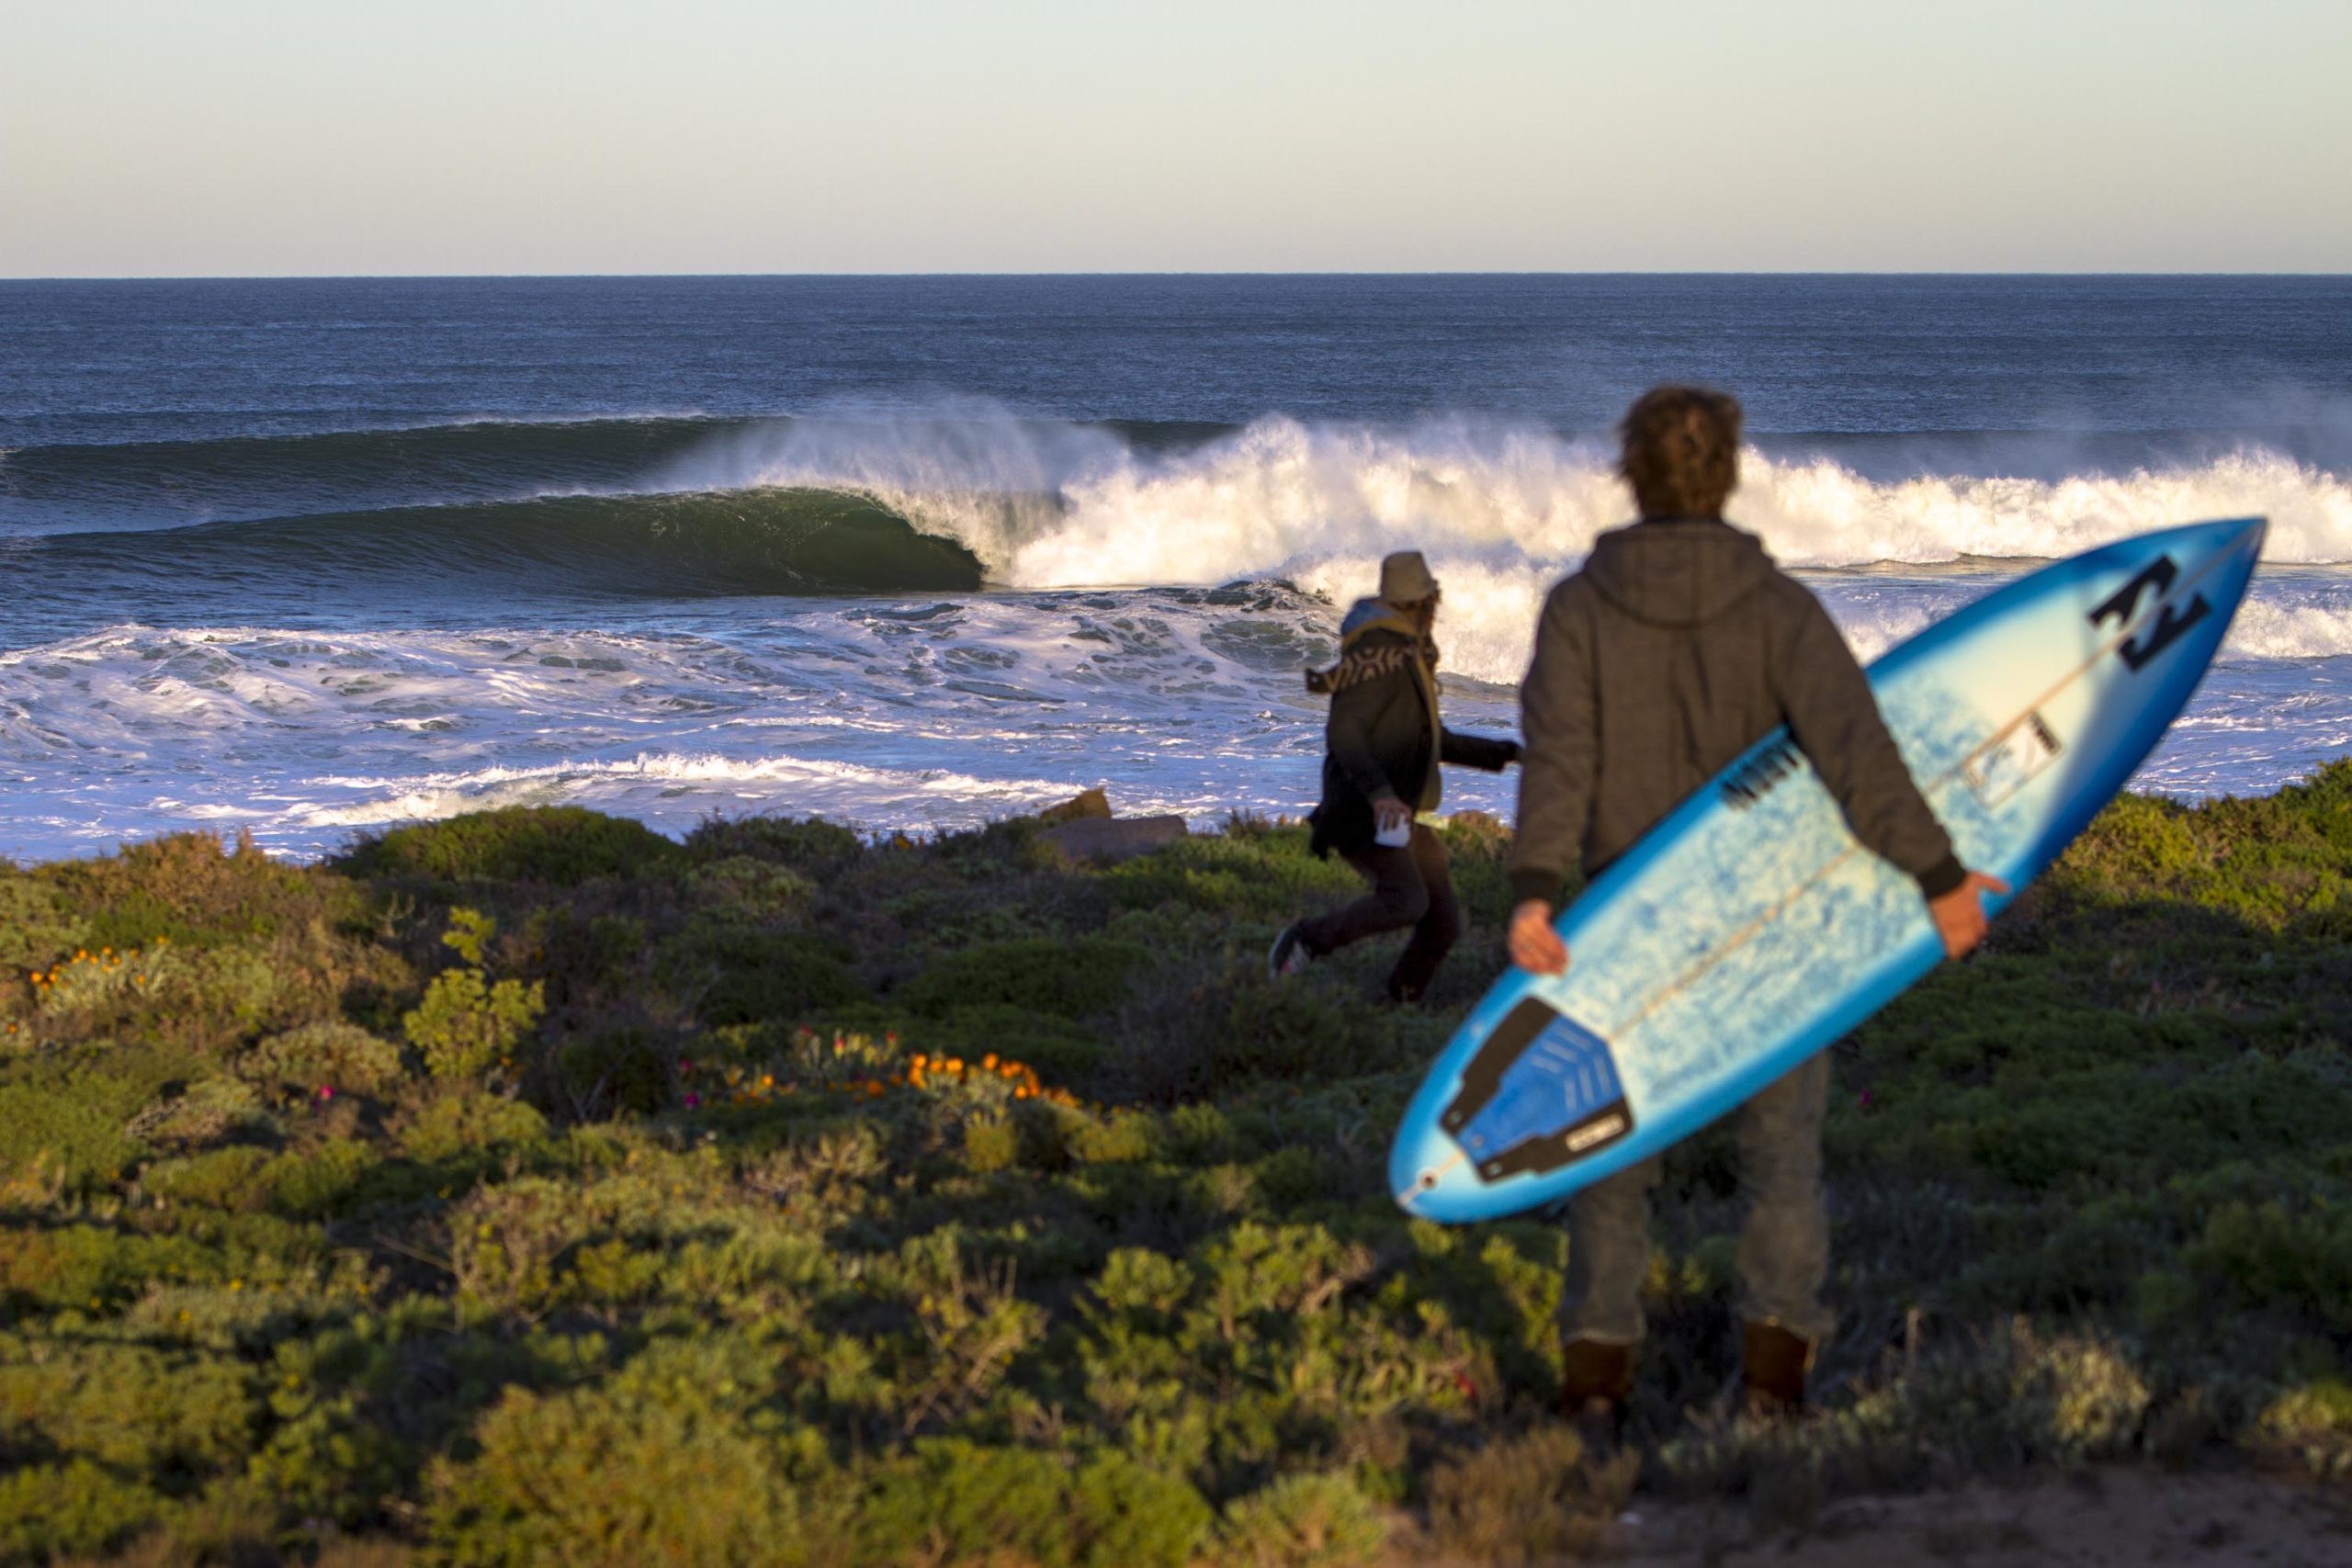 northern cape al's south africa surf